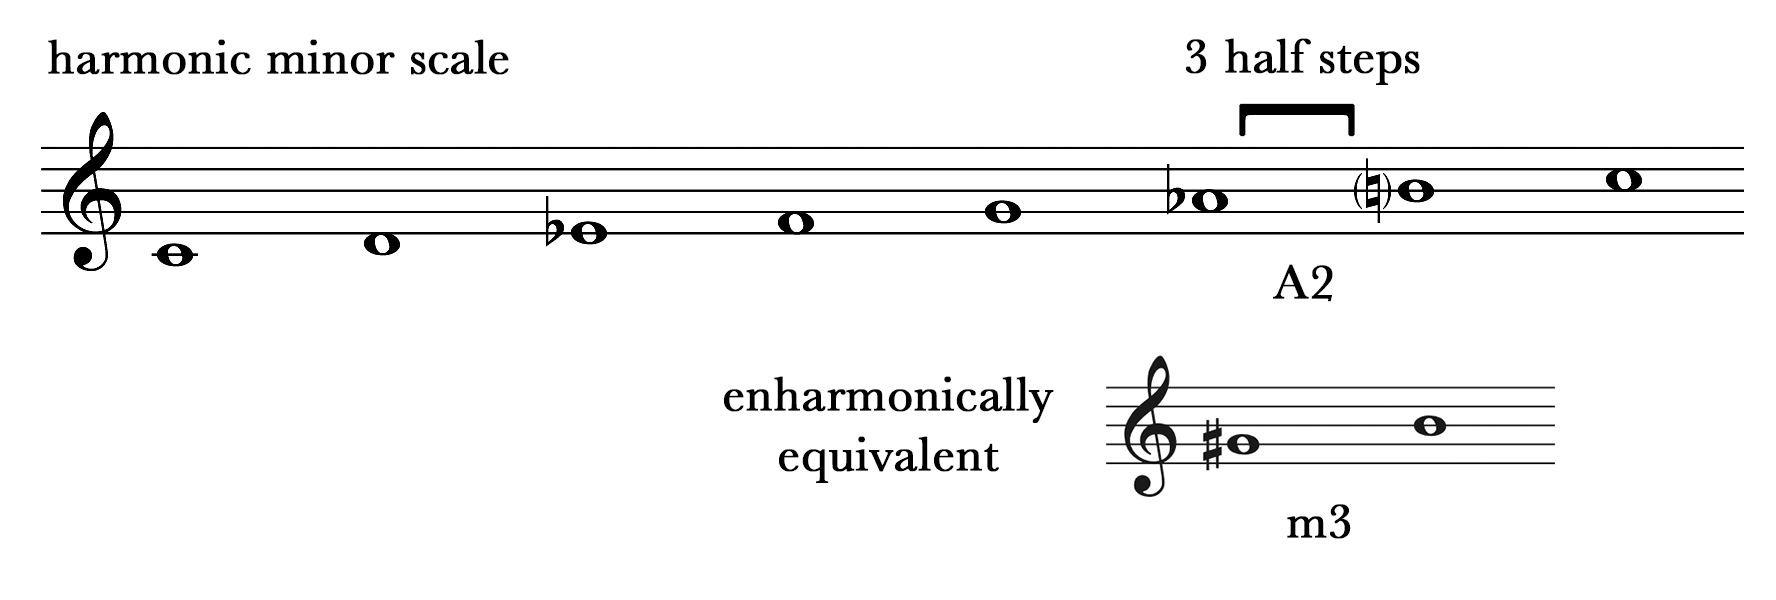 A C harmonic minor scale with an augmented second interval between scale degrees 6 and 7 shown to be enharmonically equivalent to a minor third interval.